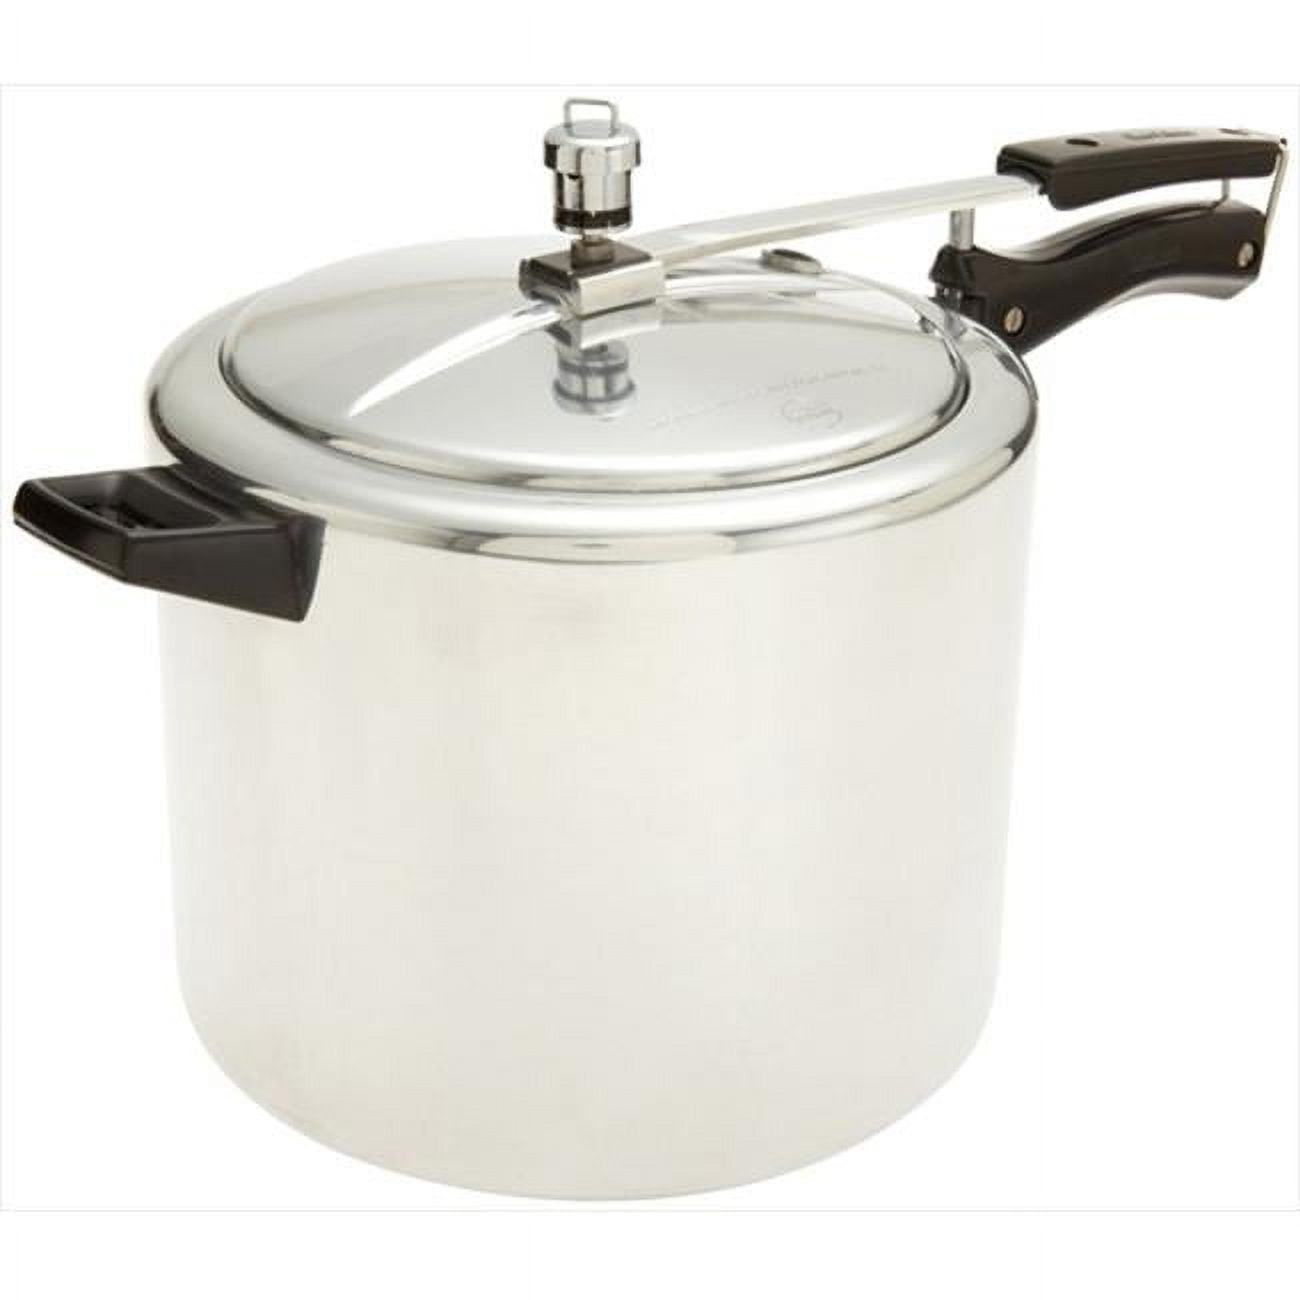 T-fal Polished Aluminum Cookware, Canner & Pressure Cooker, 22 quart,  Silver, P3105231